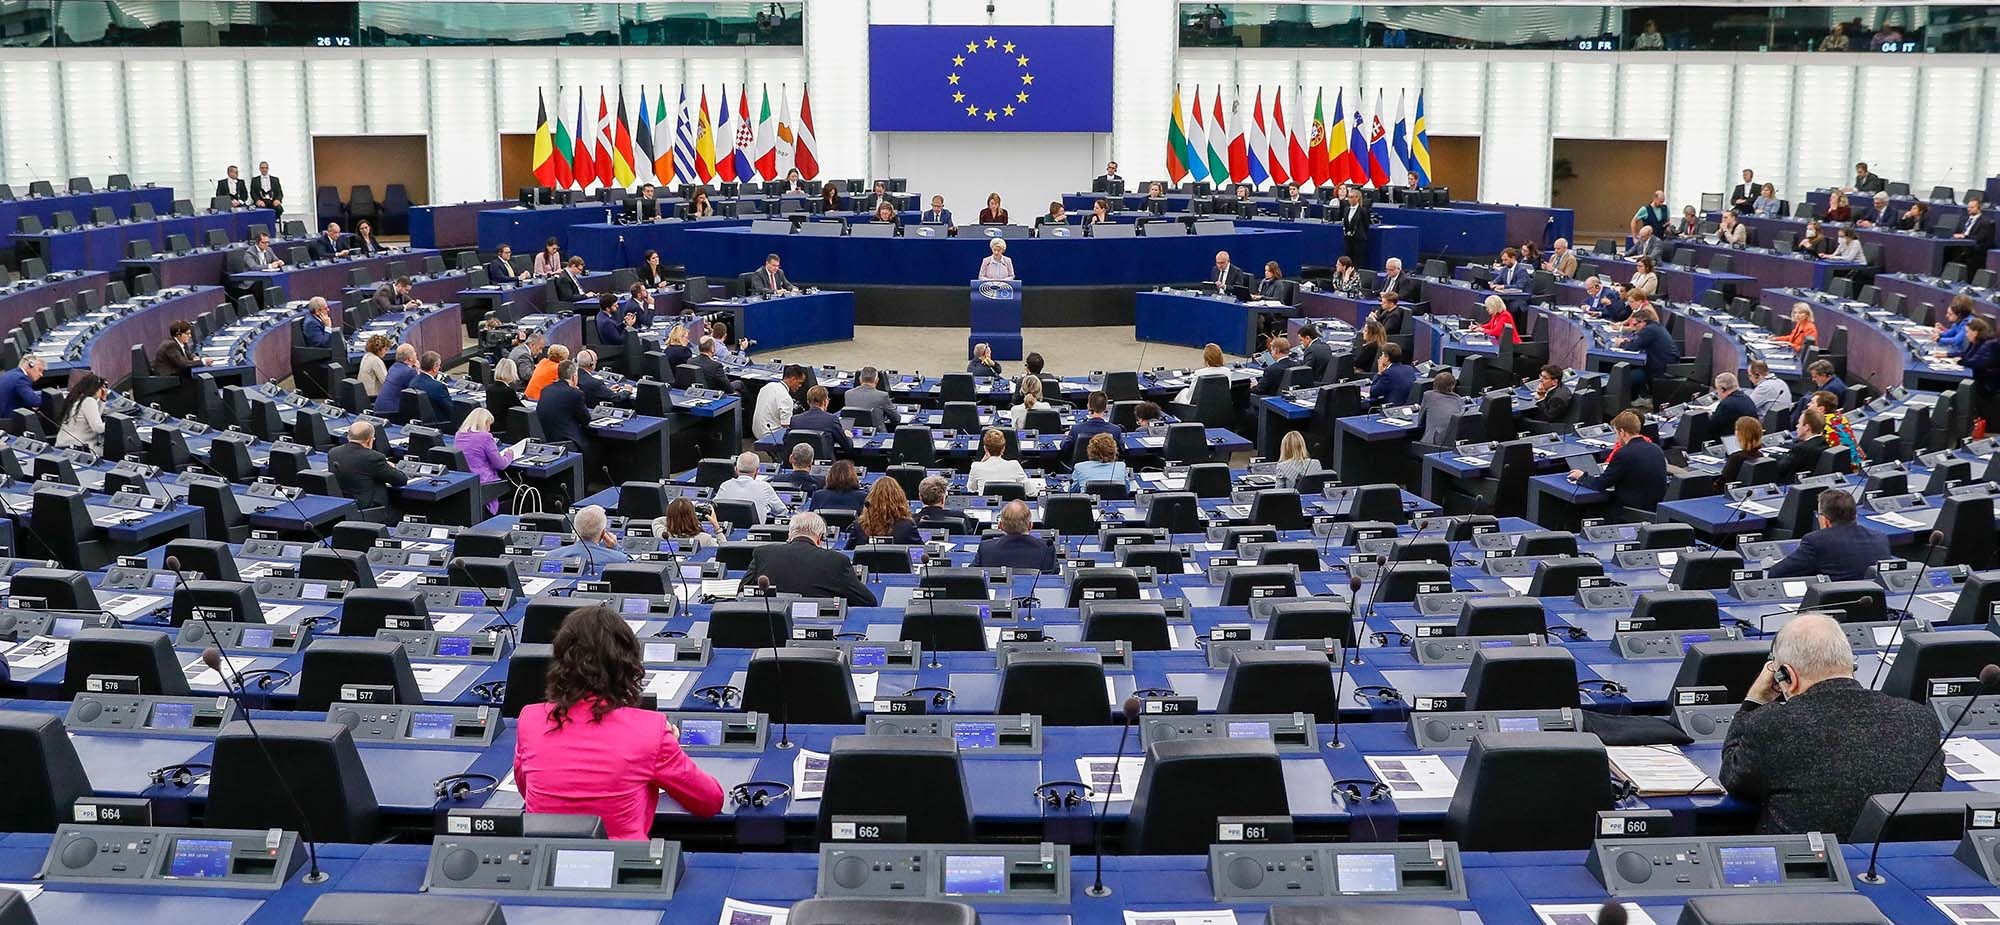 Economy: the Hungarian rule of law and the violation of fundamental rights will once again be a topic in the European Parliament